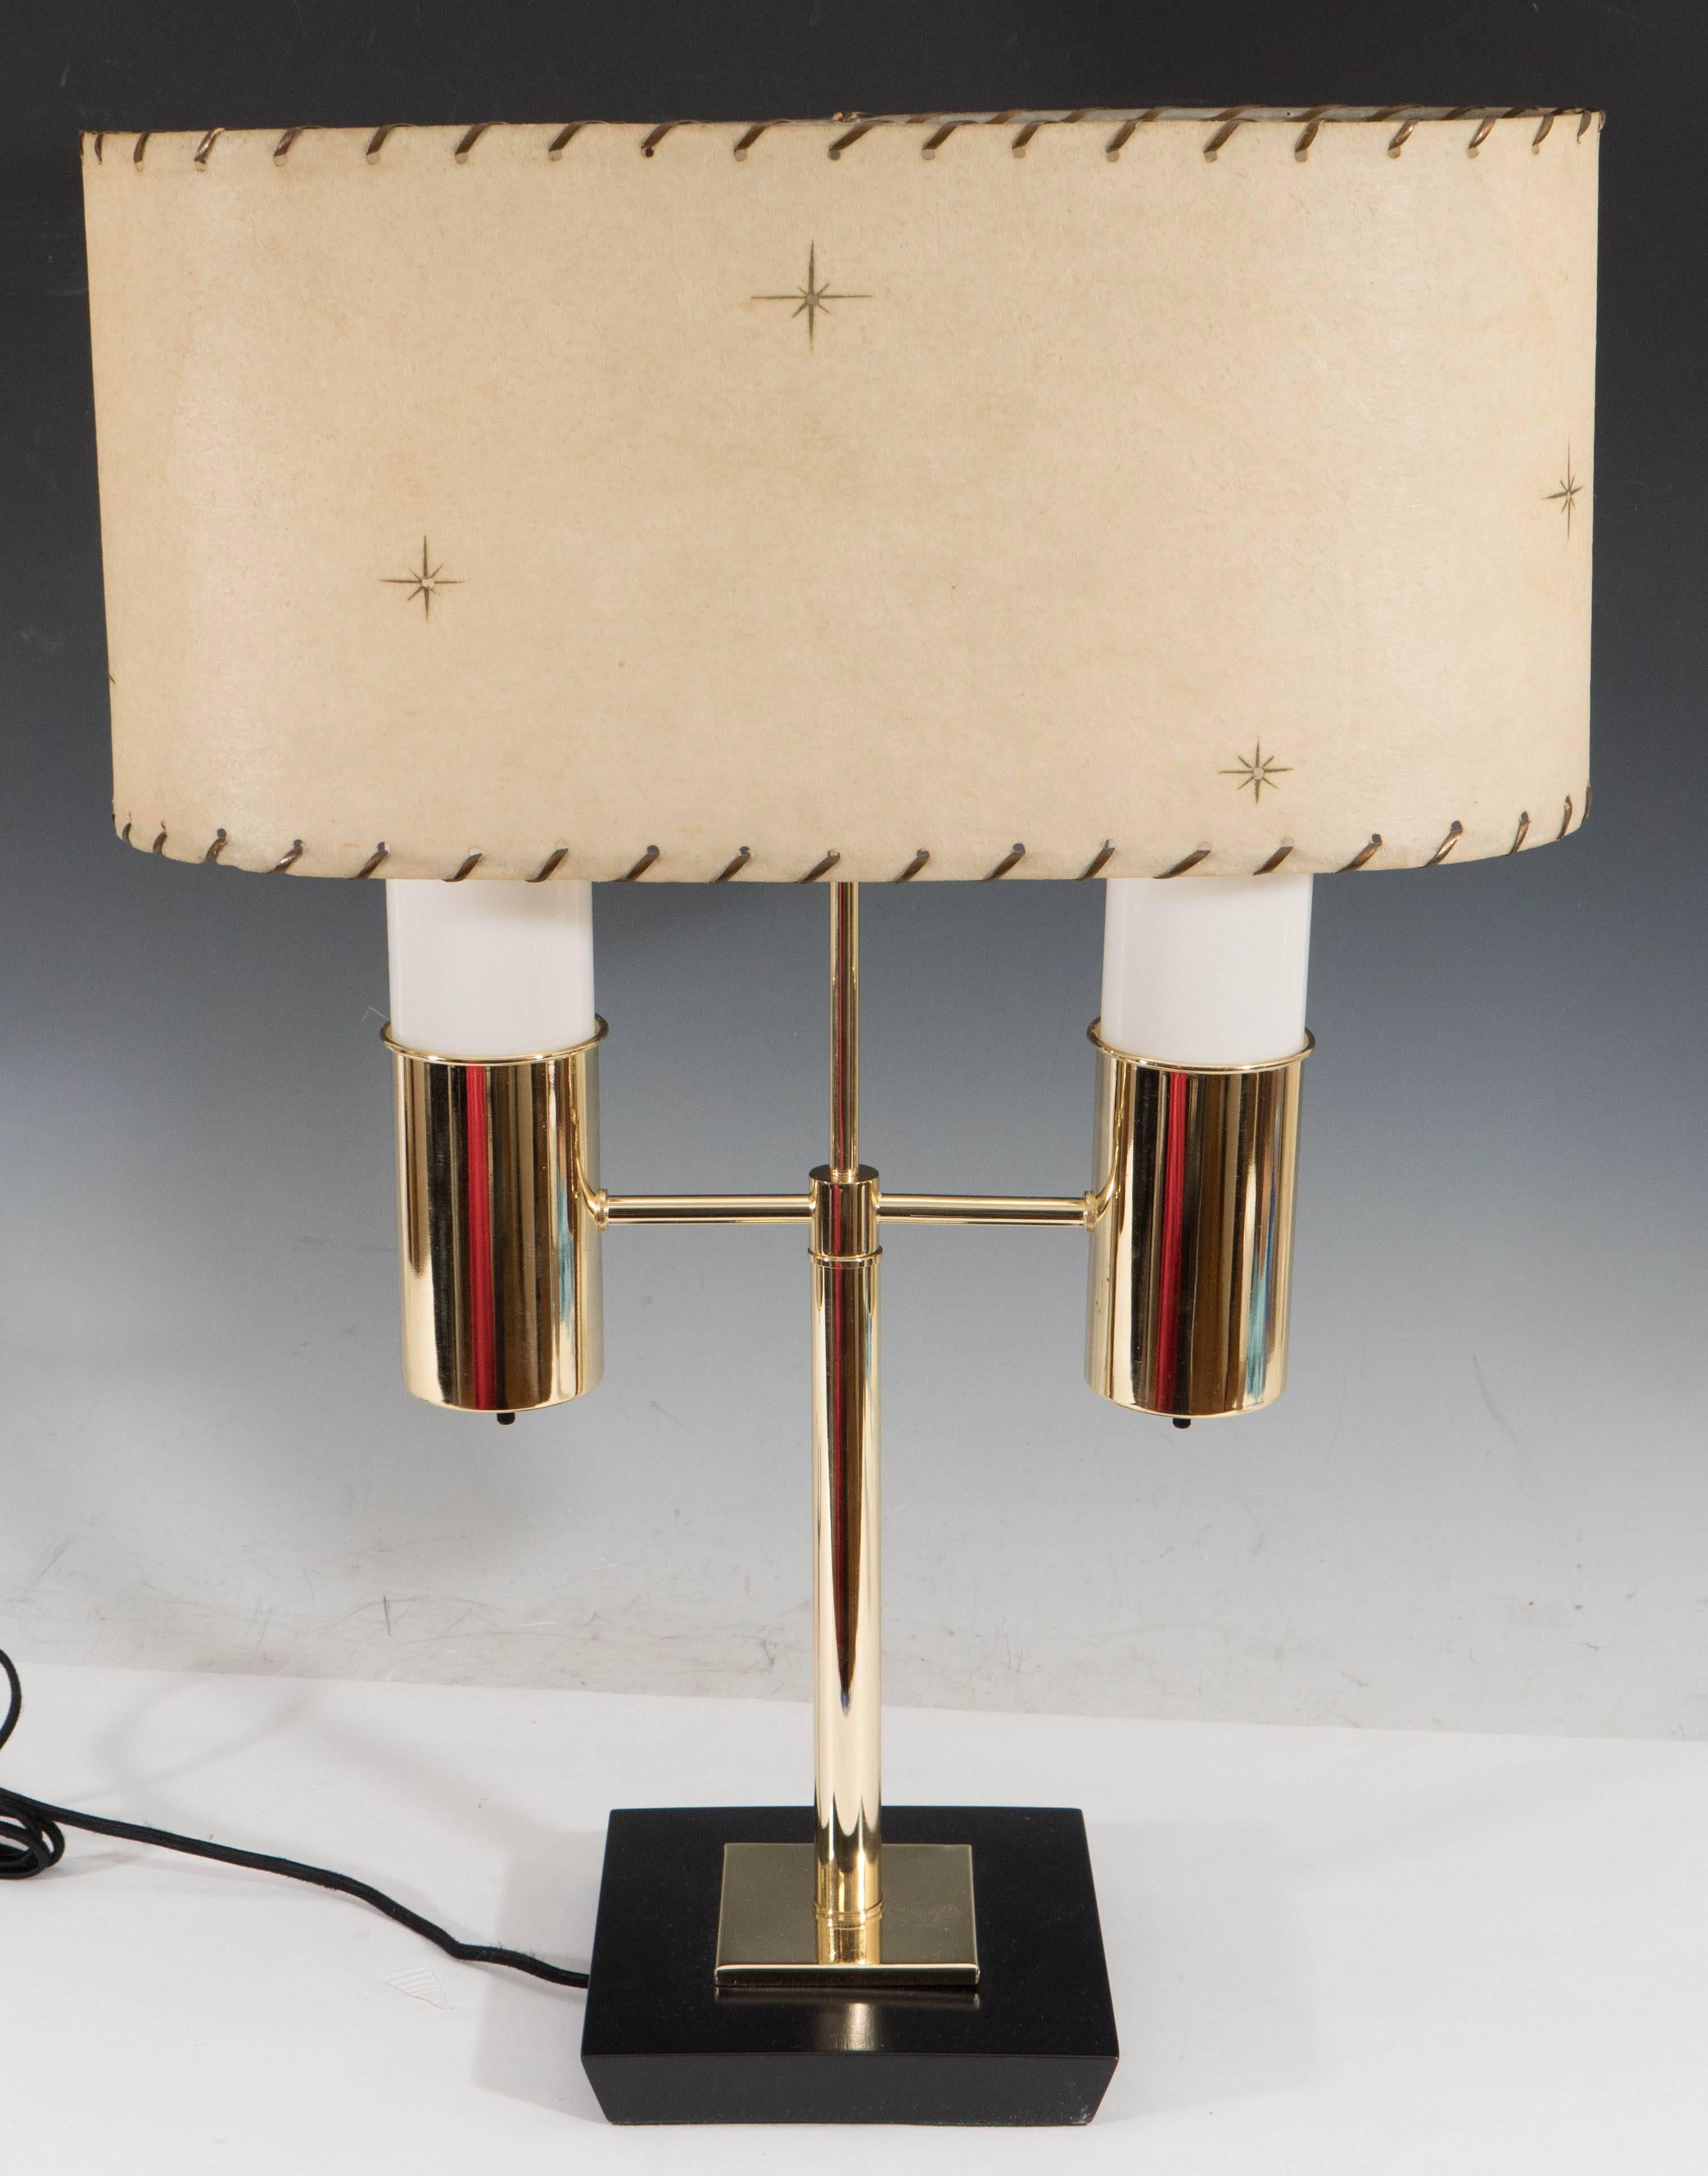 This 1950s double-light table lamp comes in polished brass, both sockets adorned with milk glass, on a black painted wood base; includes oval form parchment shade with laced stitching. The lamp remains in good vintage condition, consistent with age